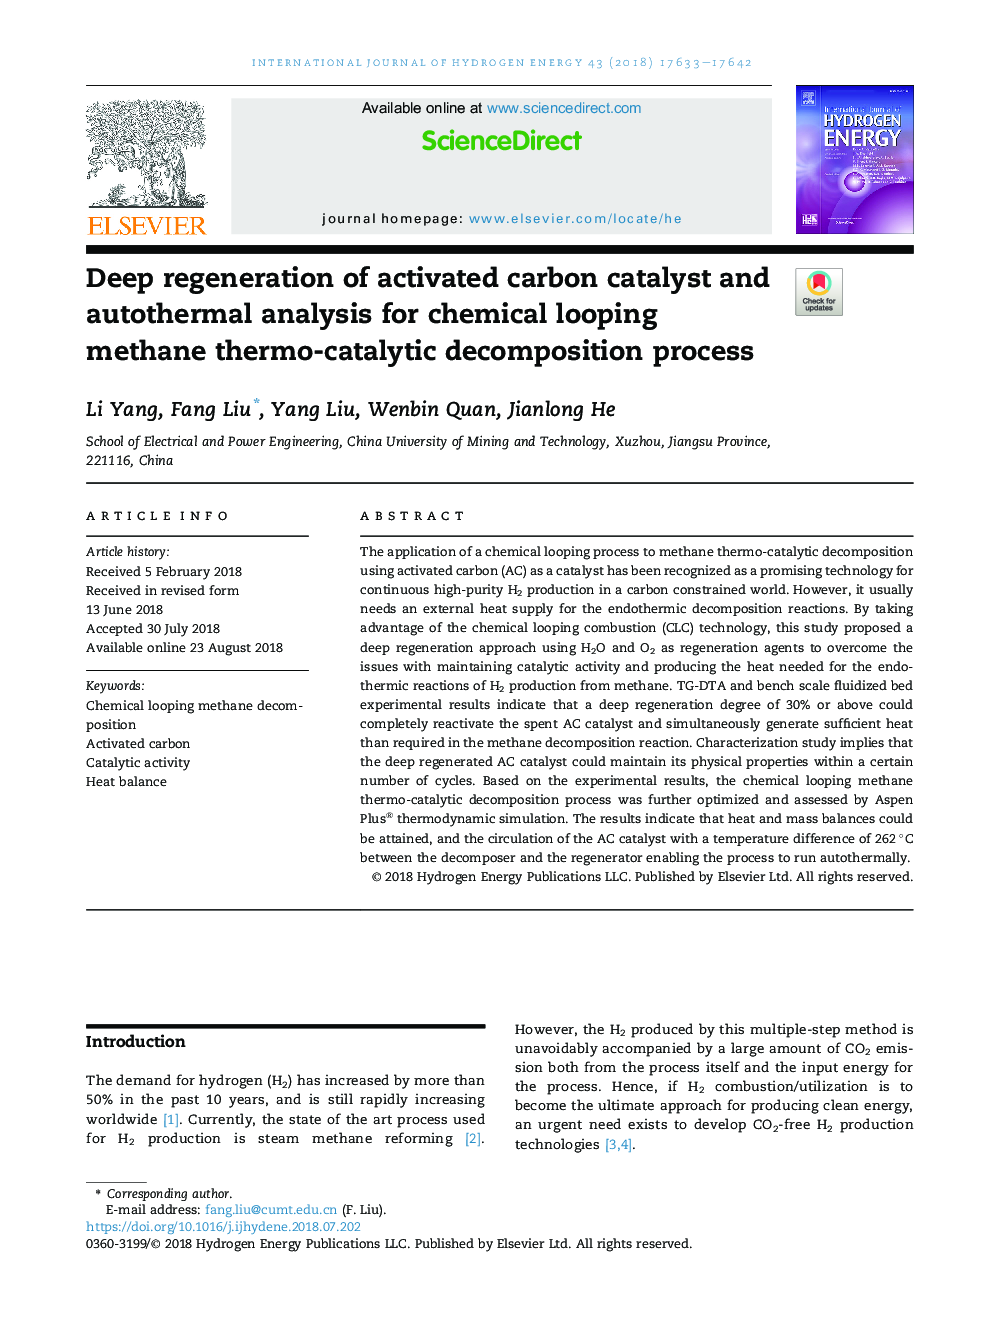 Deep regeneration of activated carbon catalyst and autothermal analysis for chemical looping methane thermo-catalytic decomposition process